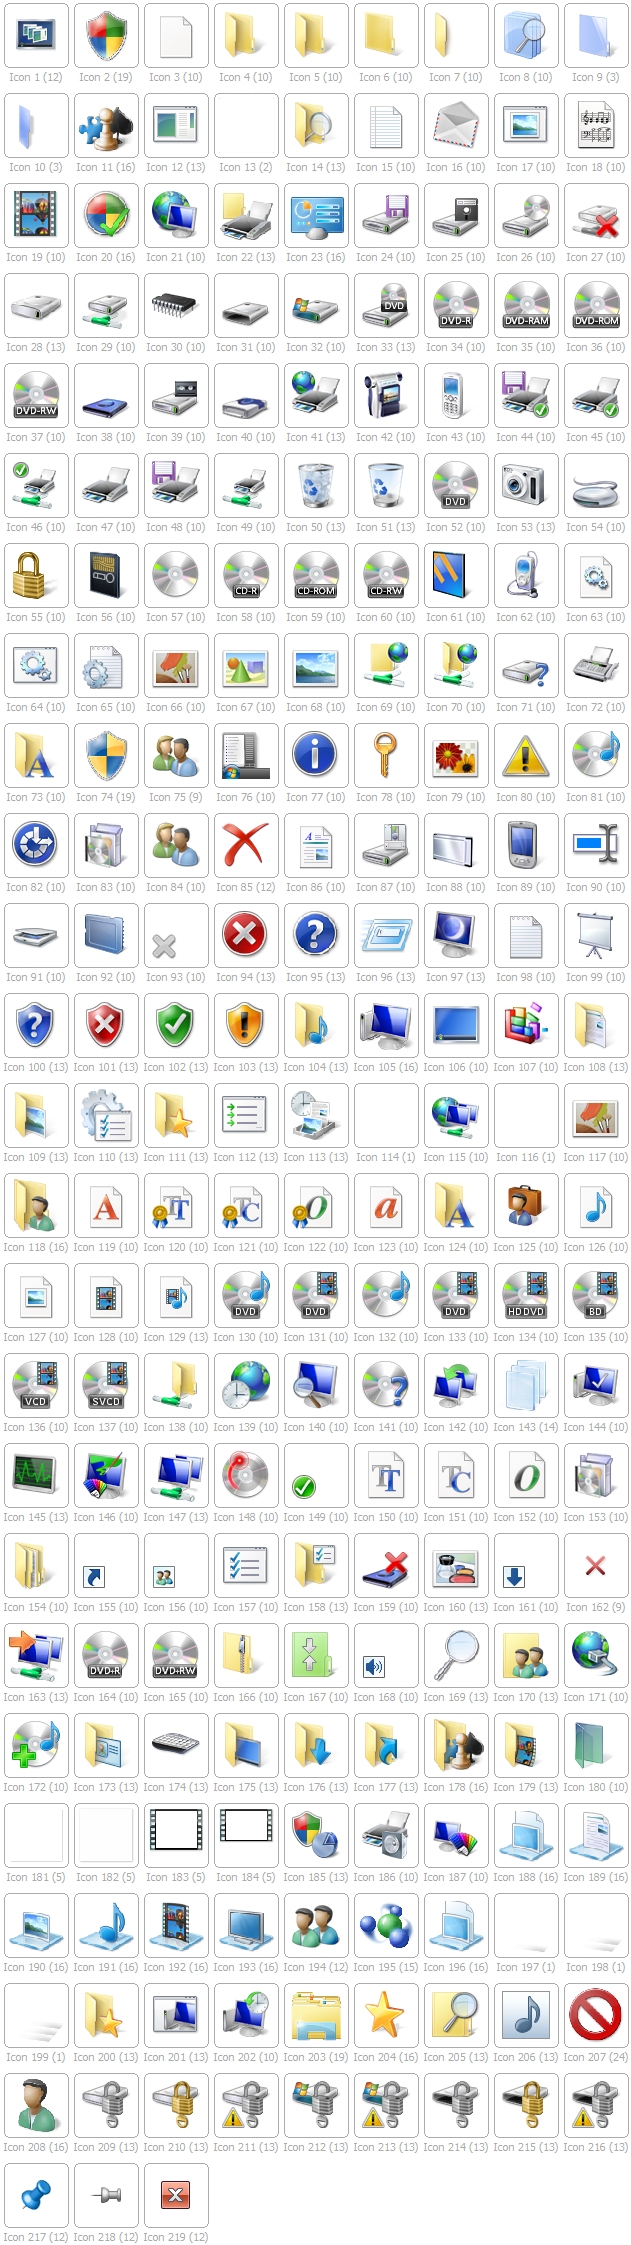 Windows Icons: Reference list with details, locations  images